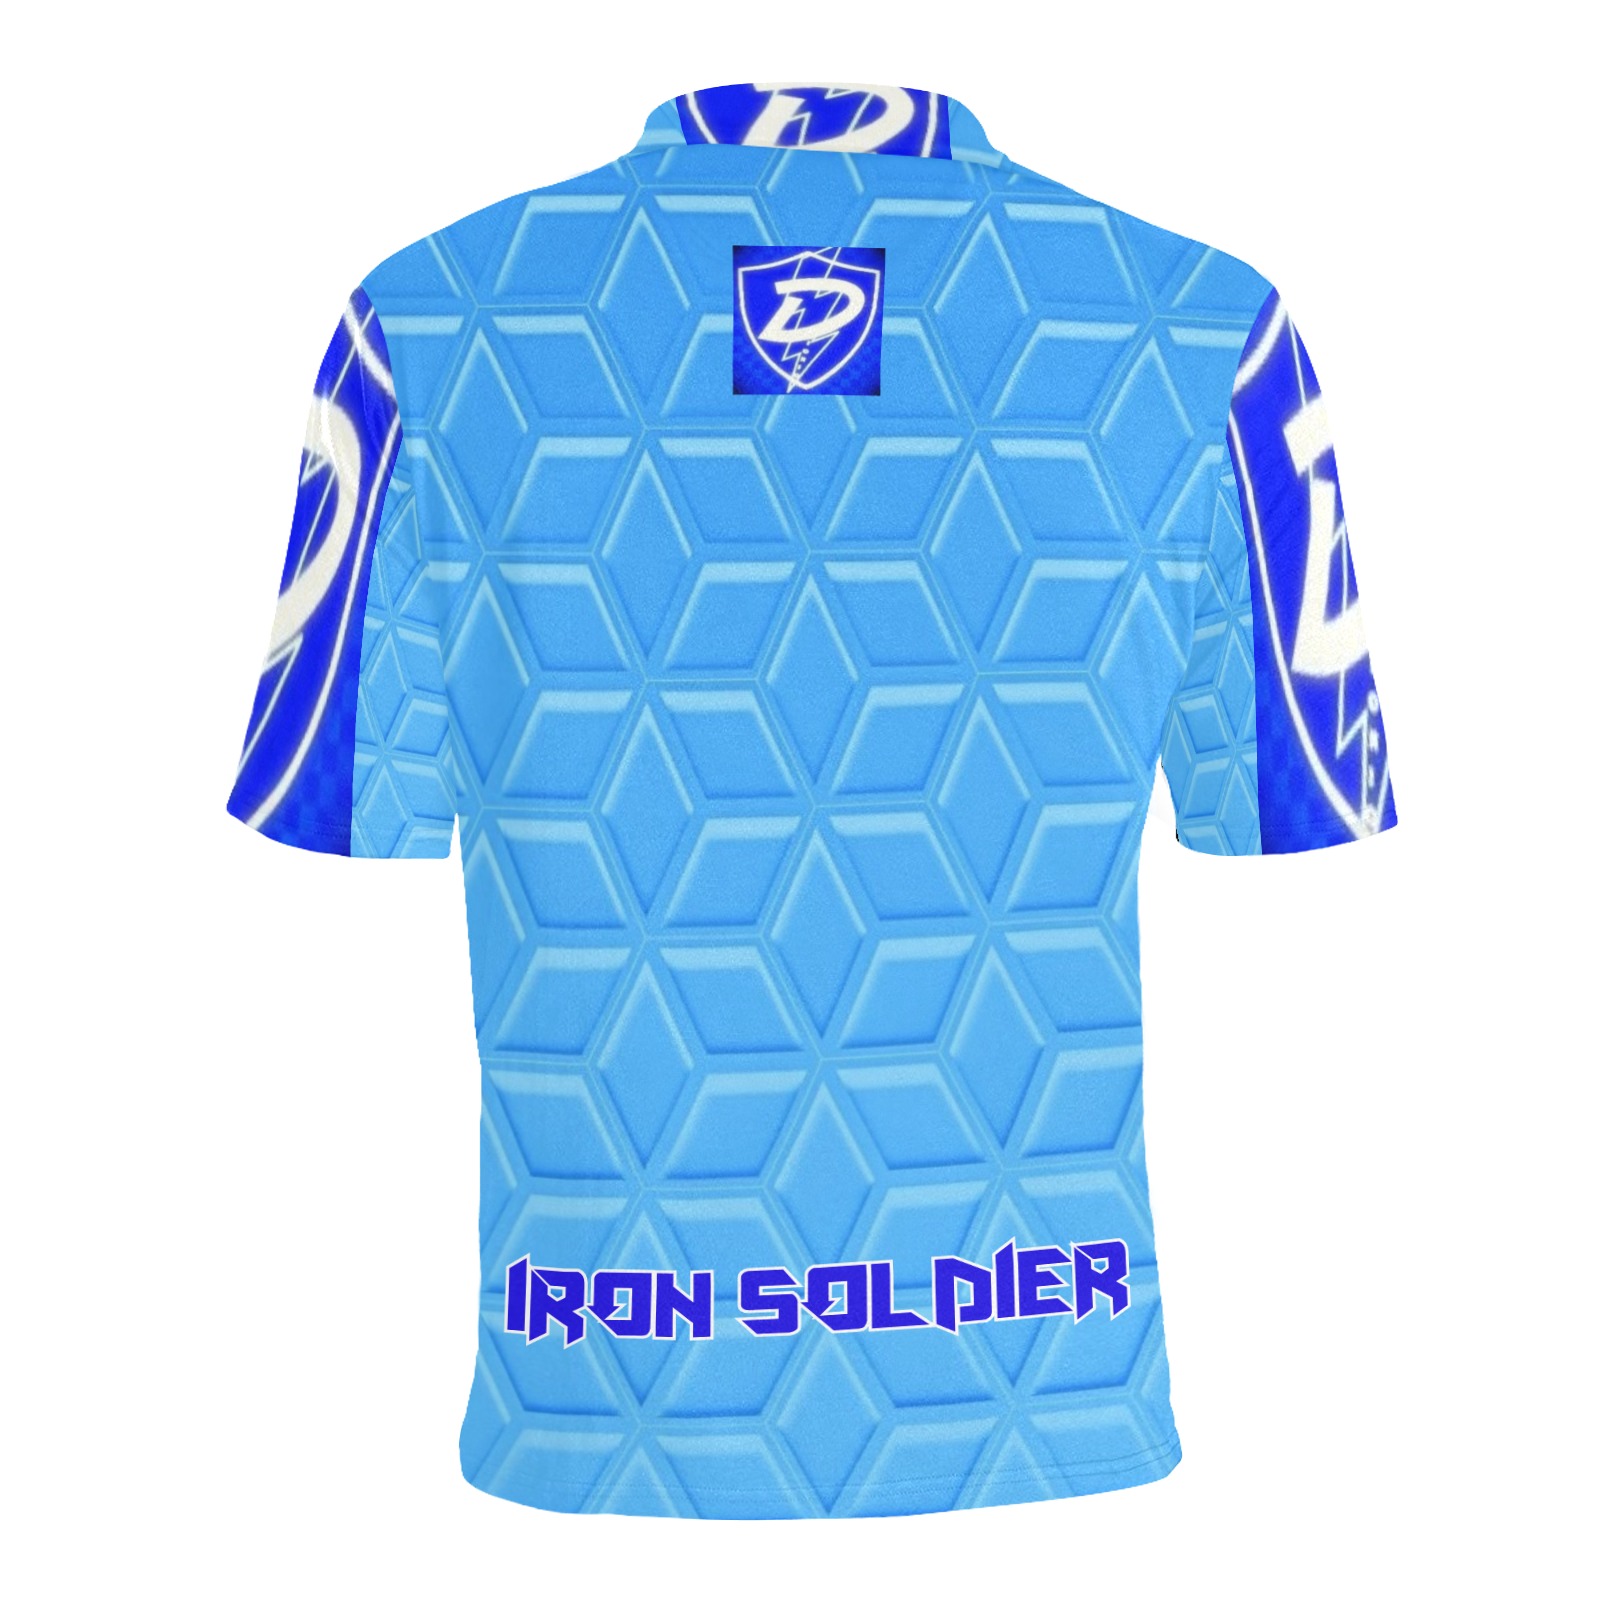 DIONIO Clothing - IRON SOLDIER POLO Shirt (Sky Blue & White) Men's All Over Print Polo Shirt (Model T55)